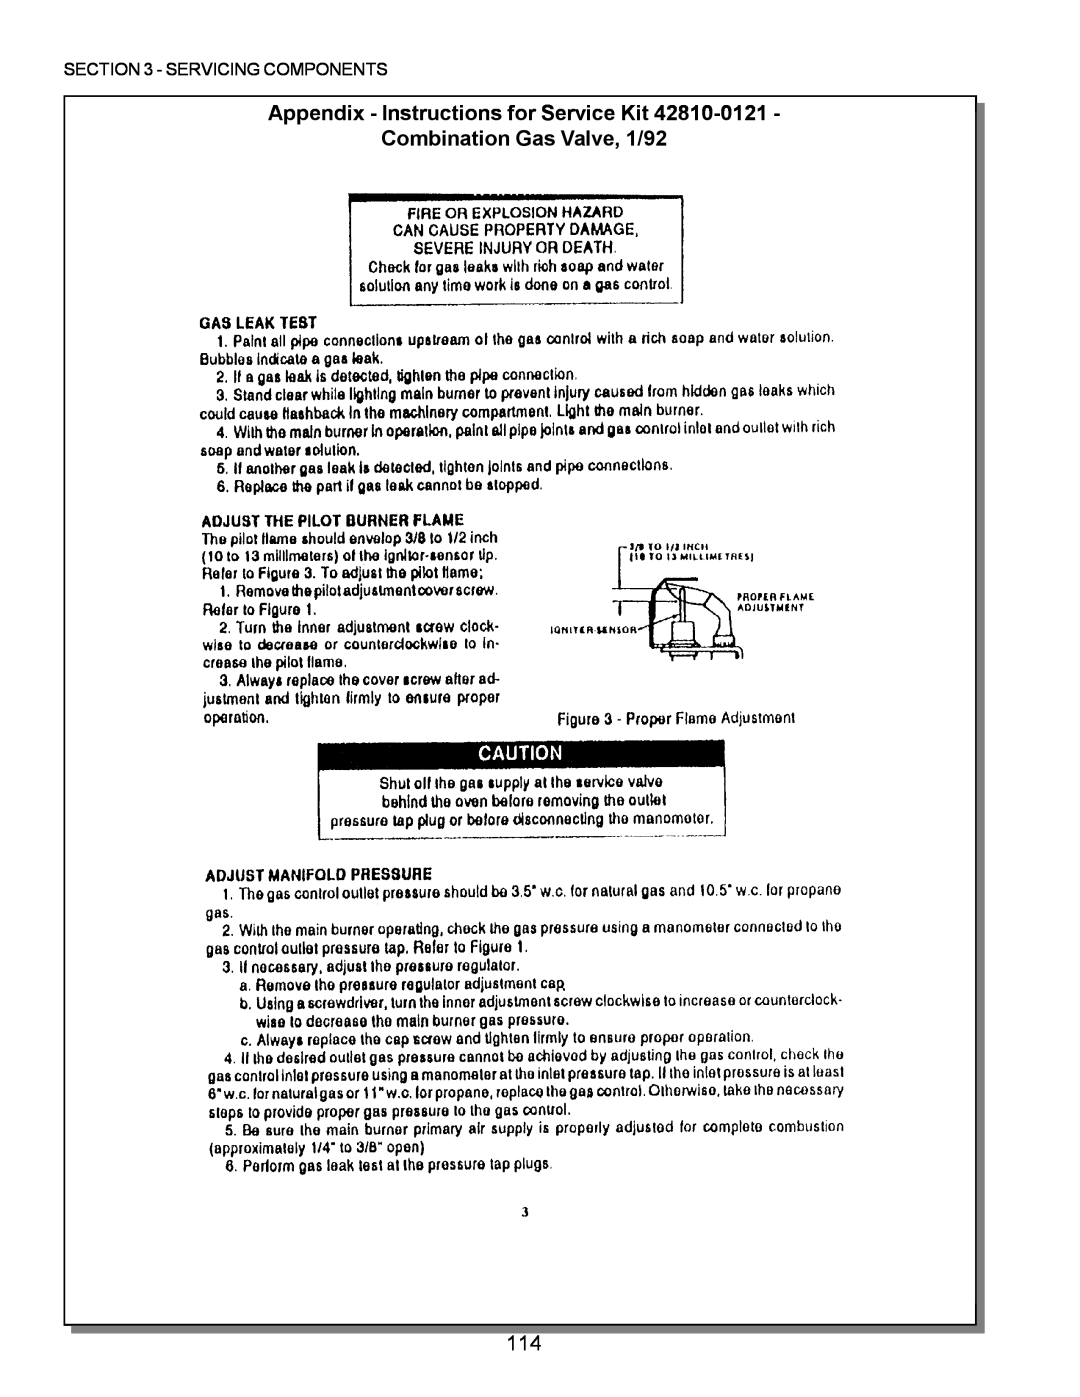 Middleby Marshall PS360, PS570 Appendix - Instructions for Service Kit Combination Gas Valve, 1/92, Servicing Components 